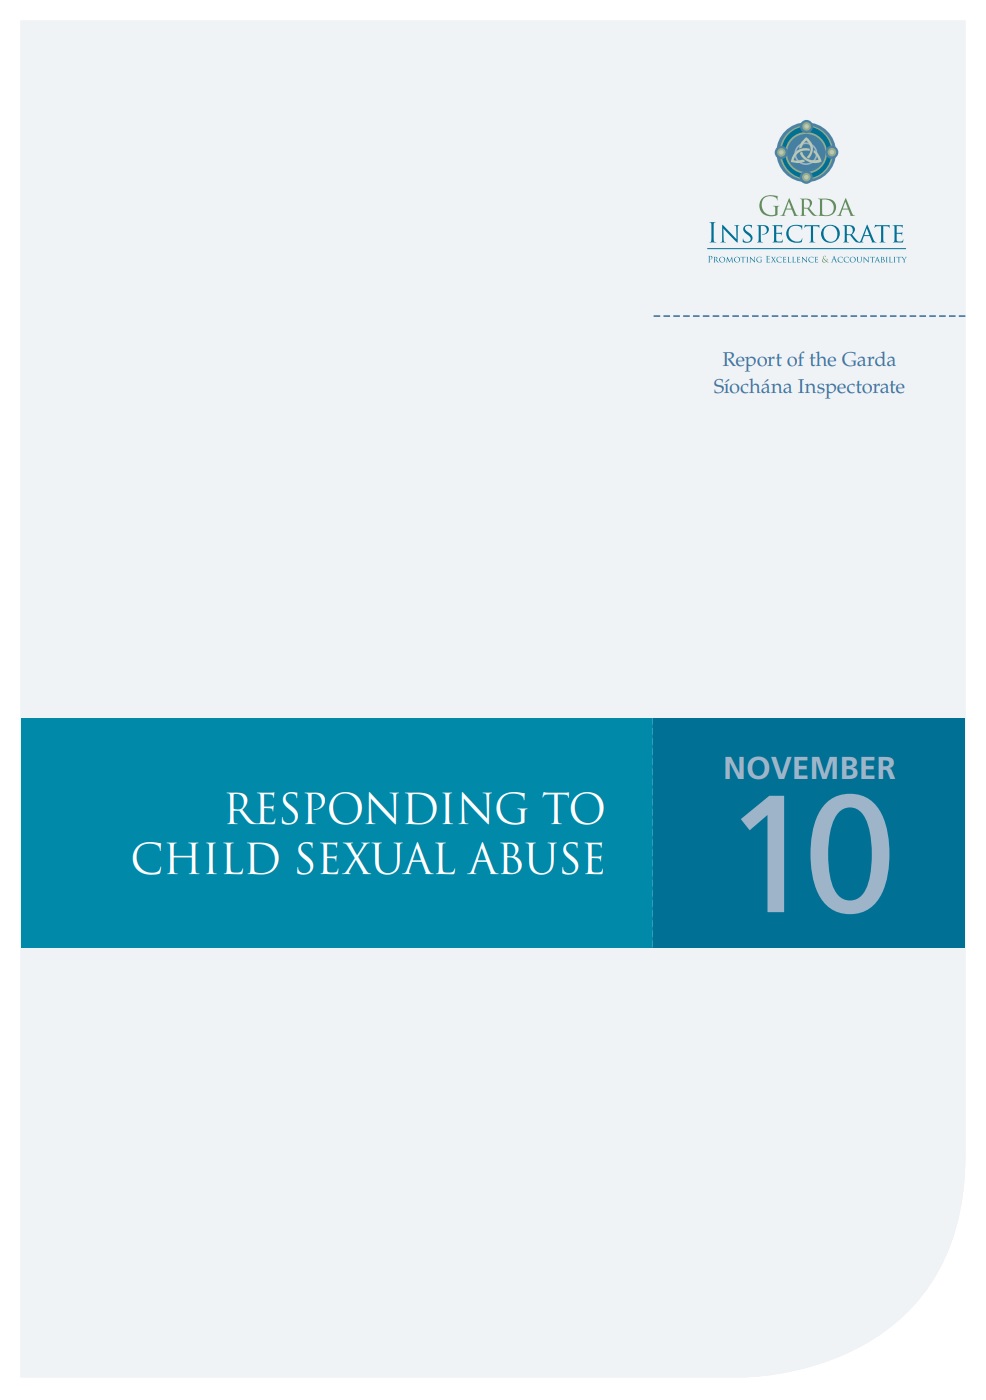 Responding to Child Sexual Abuse